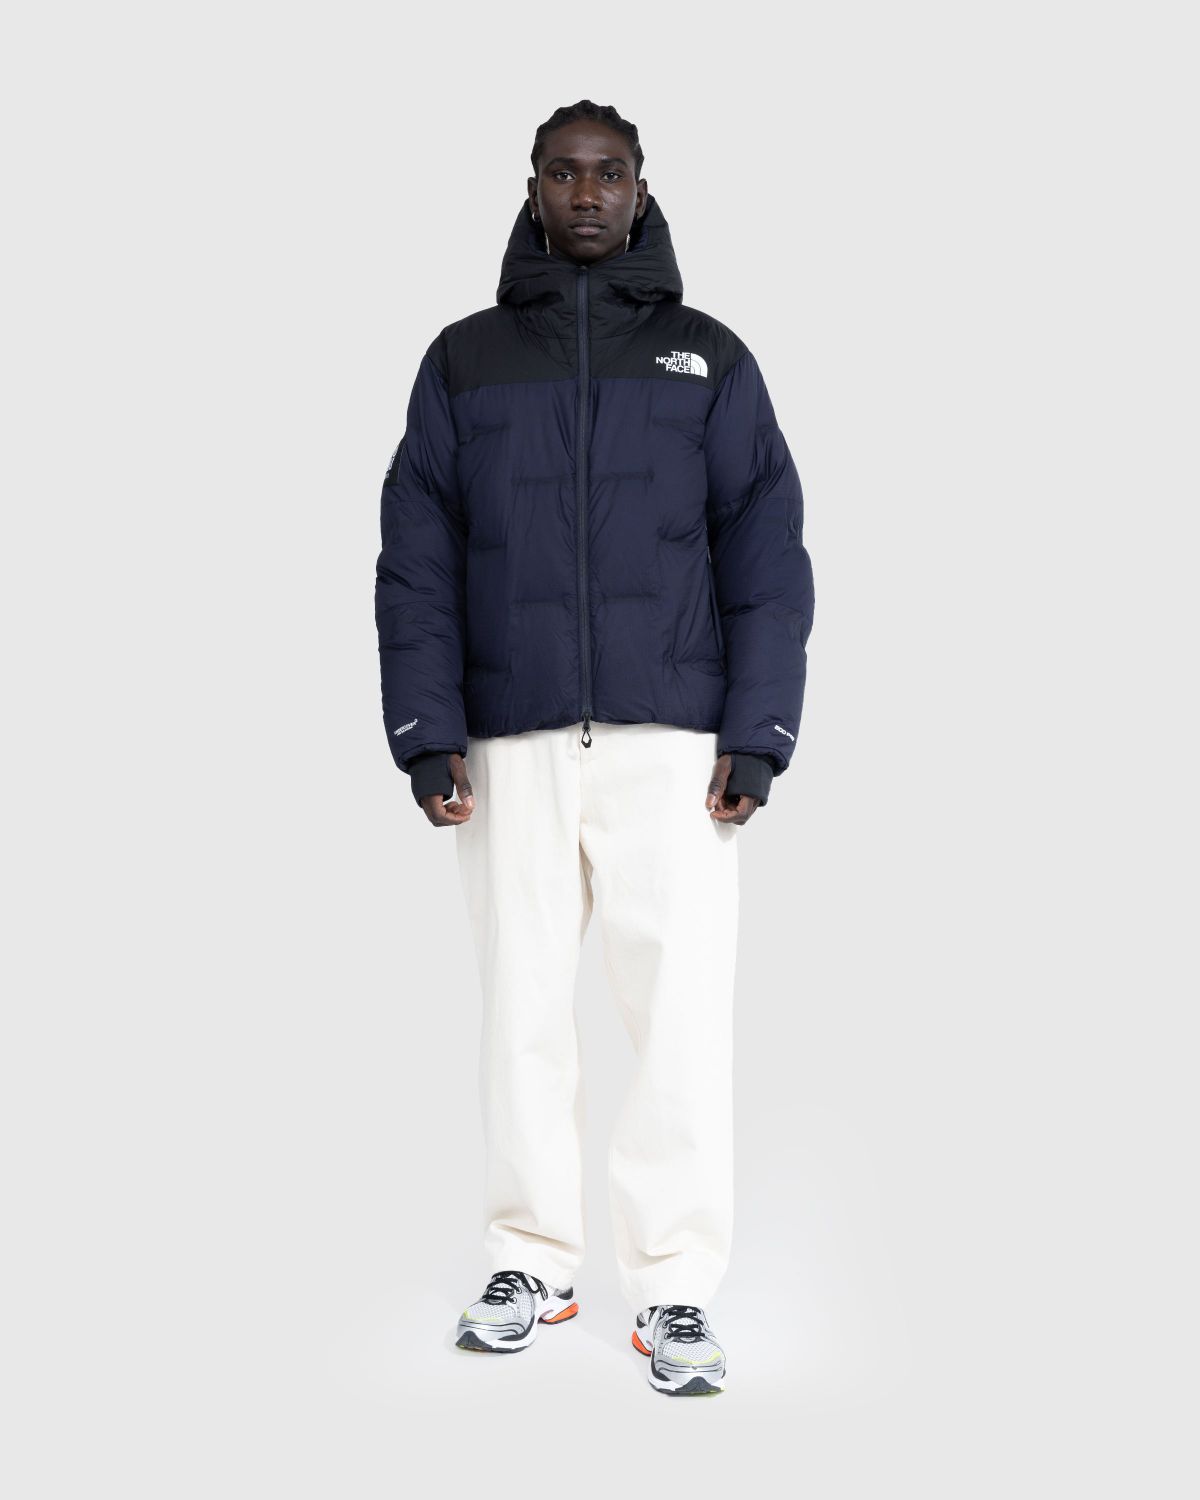 The North Face x UNDERCOVER – Soukuu Cloud Down Nupste Parka Black/Navy